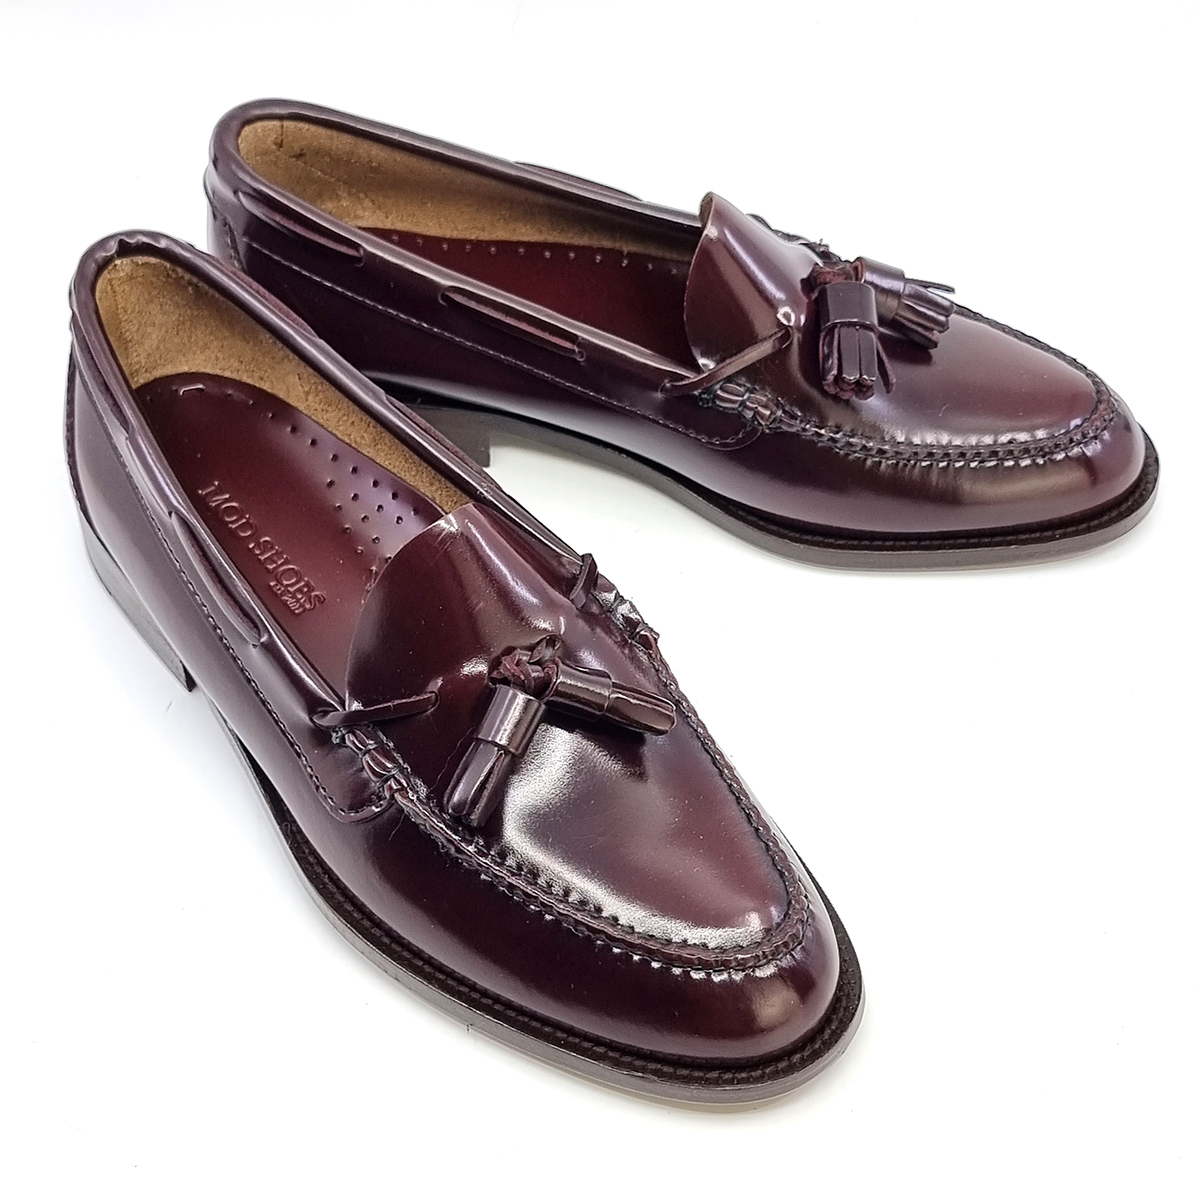 Oxblood Tassel Loafers – The “Deacon” By Mod Shoes – Mod Shoes